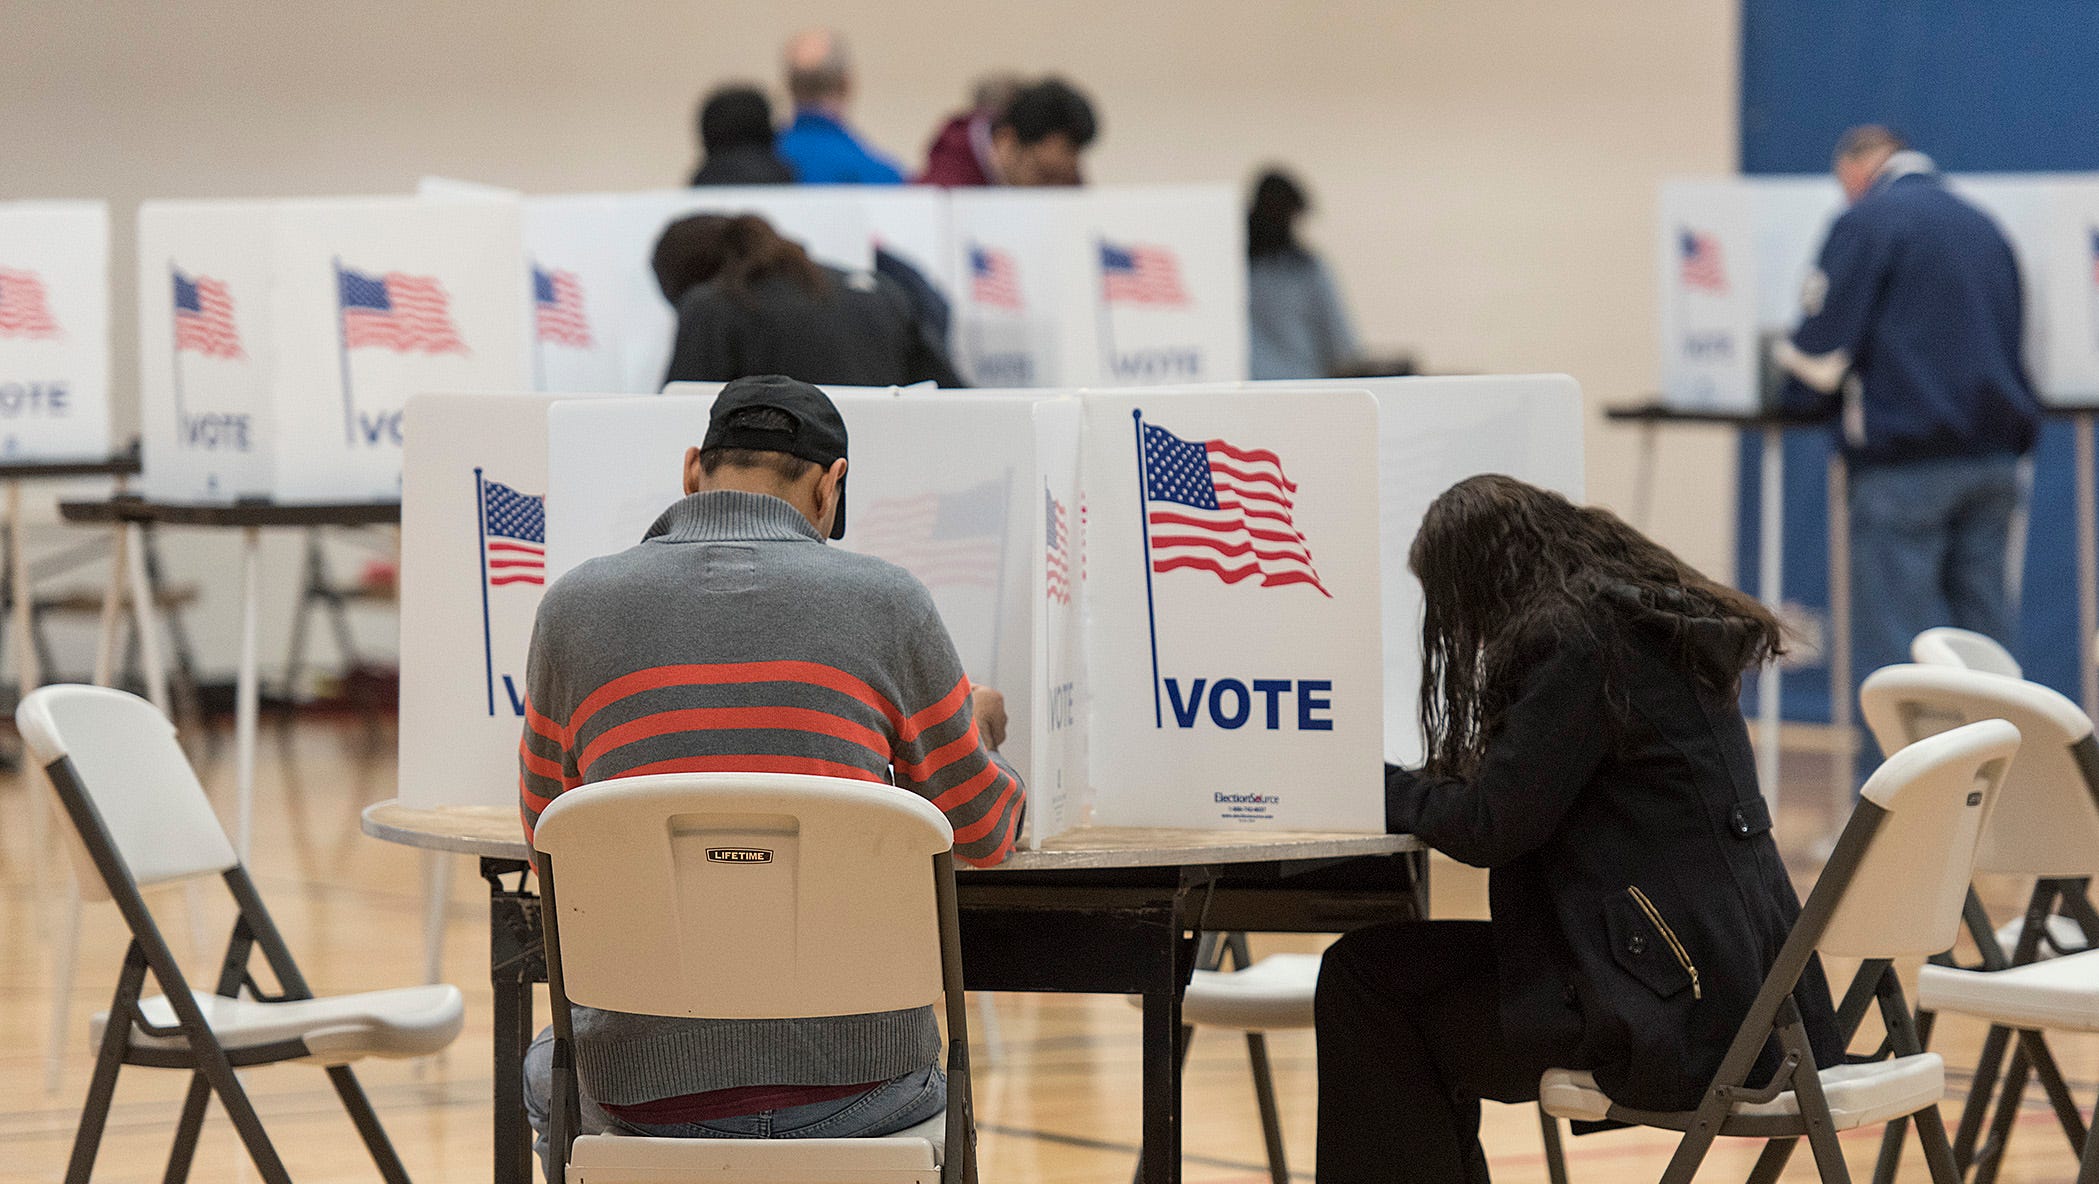 Expect Michigan elections to move slow as absentee ballot numbers rise